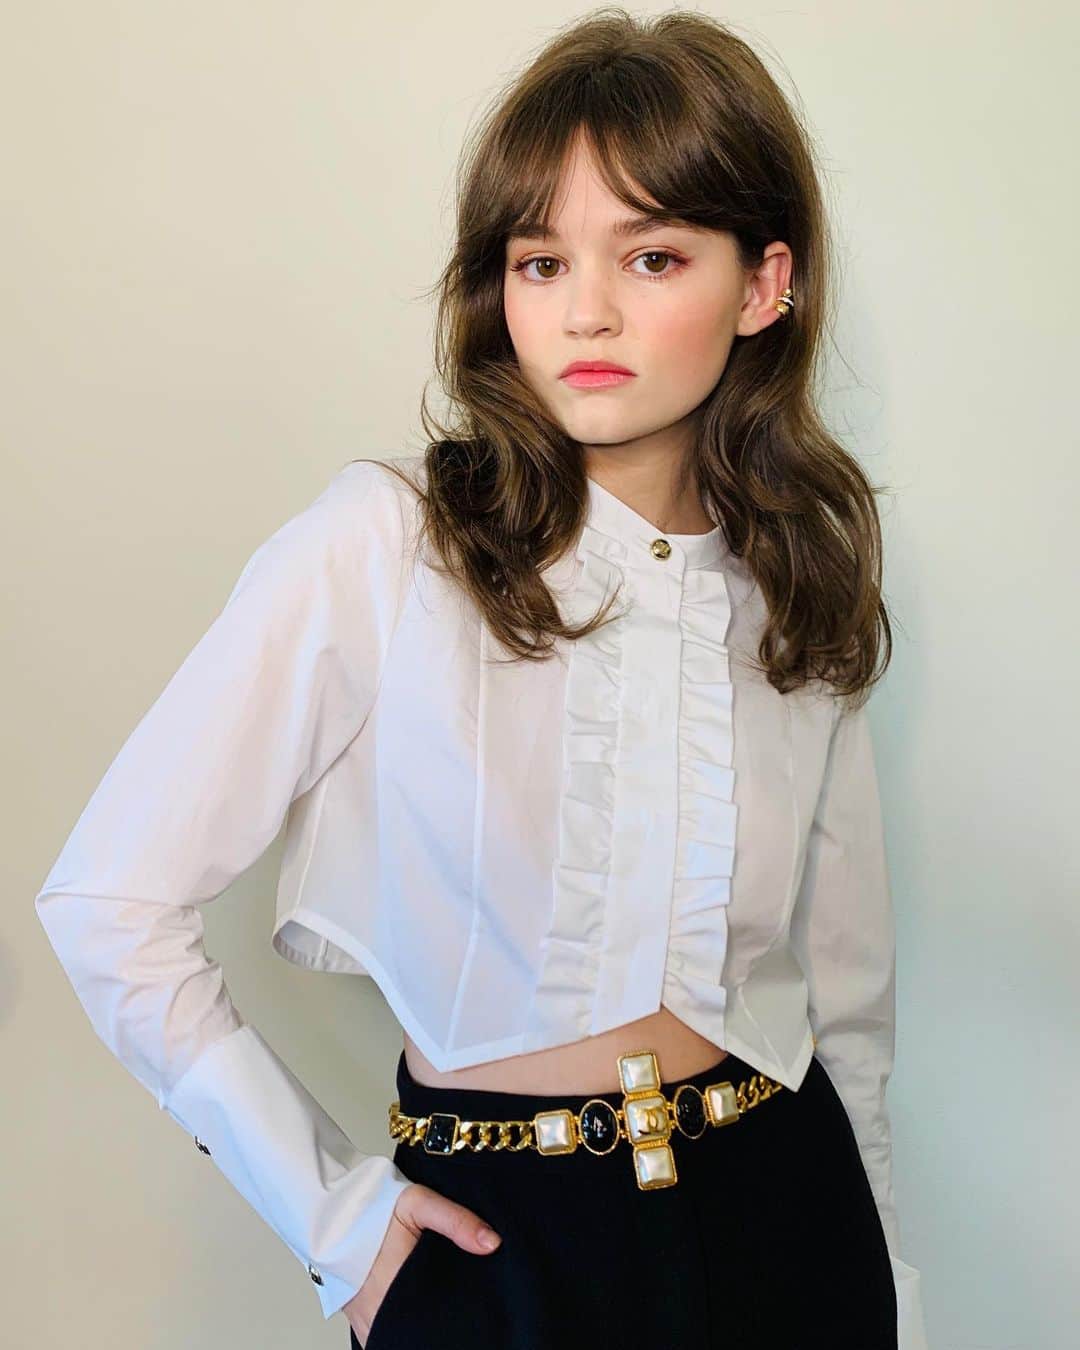 Kara Yoshimoto Buaのインスタグラム：「GO TO @welovecoco to check out  how to do this makeup with beautiful @ciarabravo #ciarabravo ❤️#chicwintermakeup #makeupbykarayoshimotobua #welovecoco #workingwithchanel #hair @mararoszak  #styling @samanthamcmillen_stylist   CHANEL BEAUTY PRODUCT BREAKDOWN:  SKIN:  CHANEL SUBLIMAGE LA CREME YEUX  HYDRABEAUTY CAMELLIA WATER CREAM  FACE: CHANEL ULTRA LE TEINT VELVET B10 LES BEIGES HEALTHY GLOW BRONZING CREAM CHANEL POWDER BLUSH 430 Foschia Rosa  BROWS:  CHANEL CRAYON SOURCILS BRUN NATUREL LE GEL SOURCILS Longwear Eyebrow Gel 360 Blond + 370 Brun  EYES:  CHANEL OMBRE PREMIERE LAQUE 24 Rising Sun CHANEL MULTI-EFFECT QUADRA EYESHADOW  364 Candeur et Séduction CHANEL LE VOLUME RÉVOLUTION DE CHANEL 27  LIPS: CHANEL LE CRAYON LÈVRES 156 Beige Natural + 166 Rose Vif CHANEL ROUGE COCO GLOSS 738」